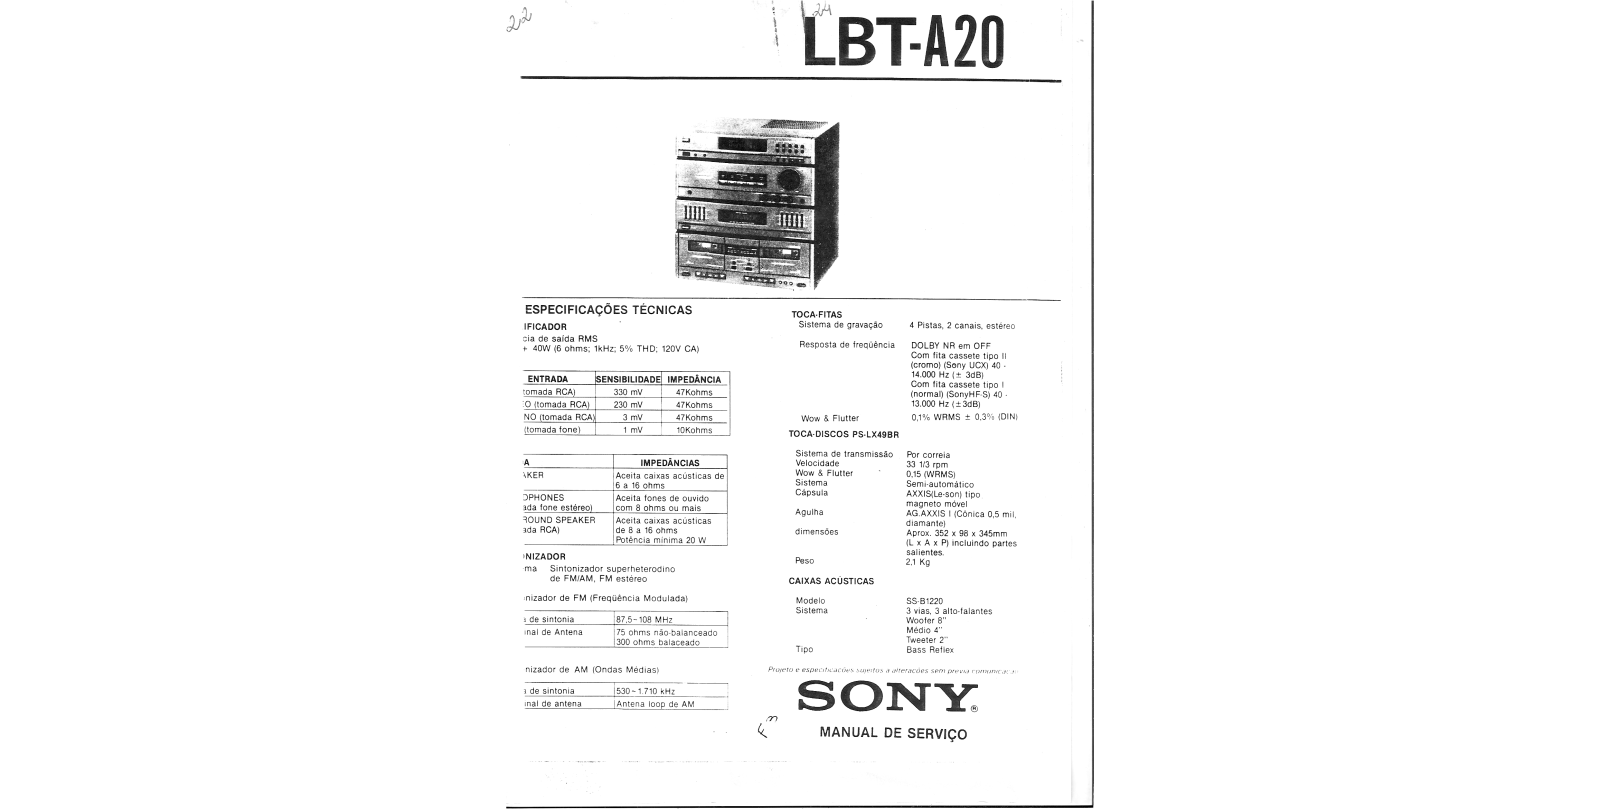 Sony LBT-A20 Schematic